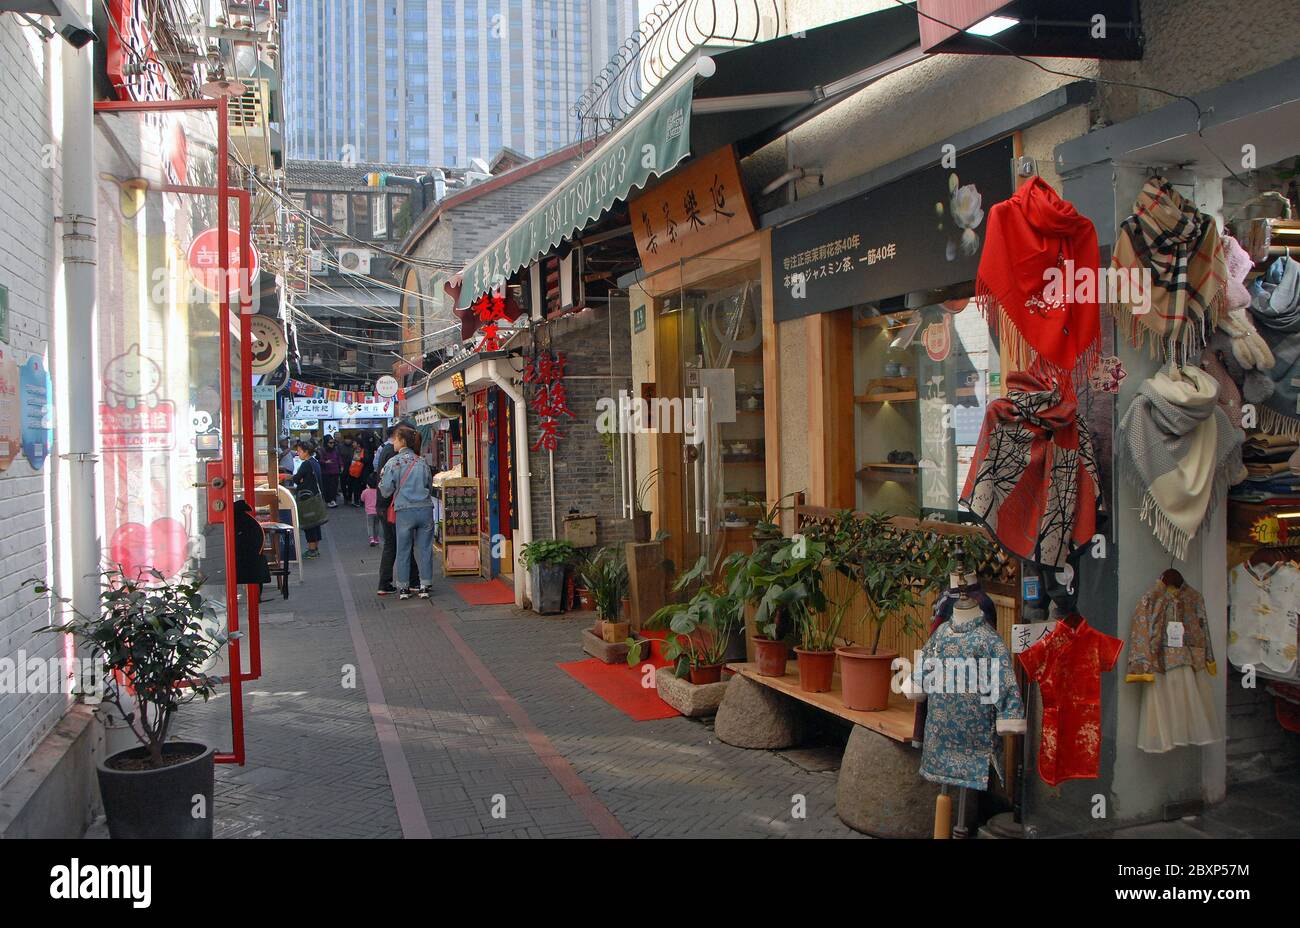 Tianzifang in Shanghai, China. Tianzifang district is an area of alleyways in Shanghai known for art and craft stores, coffee shops and art studios. Stock Photo